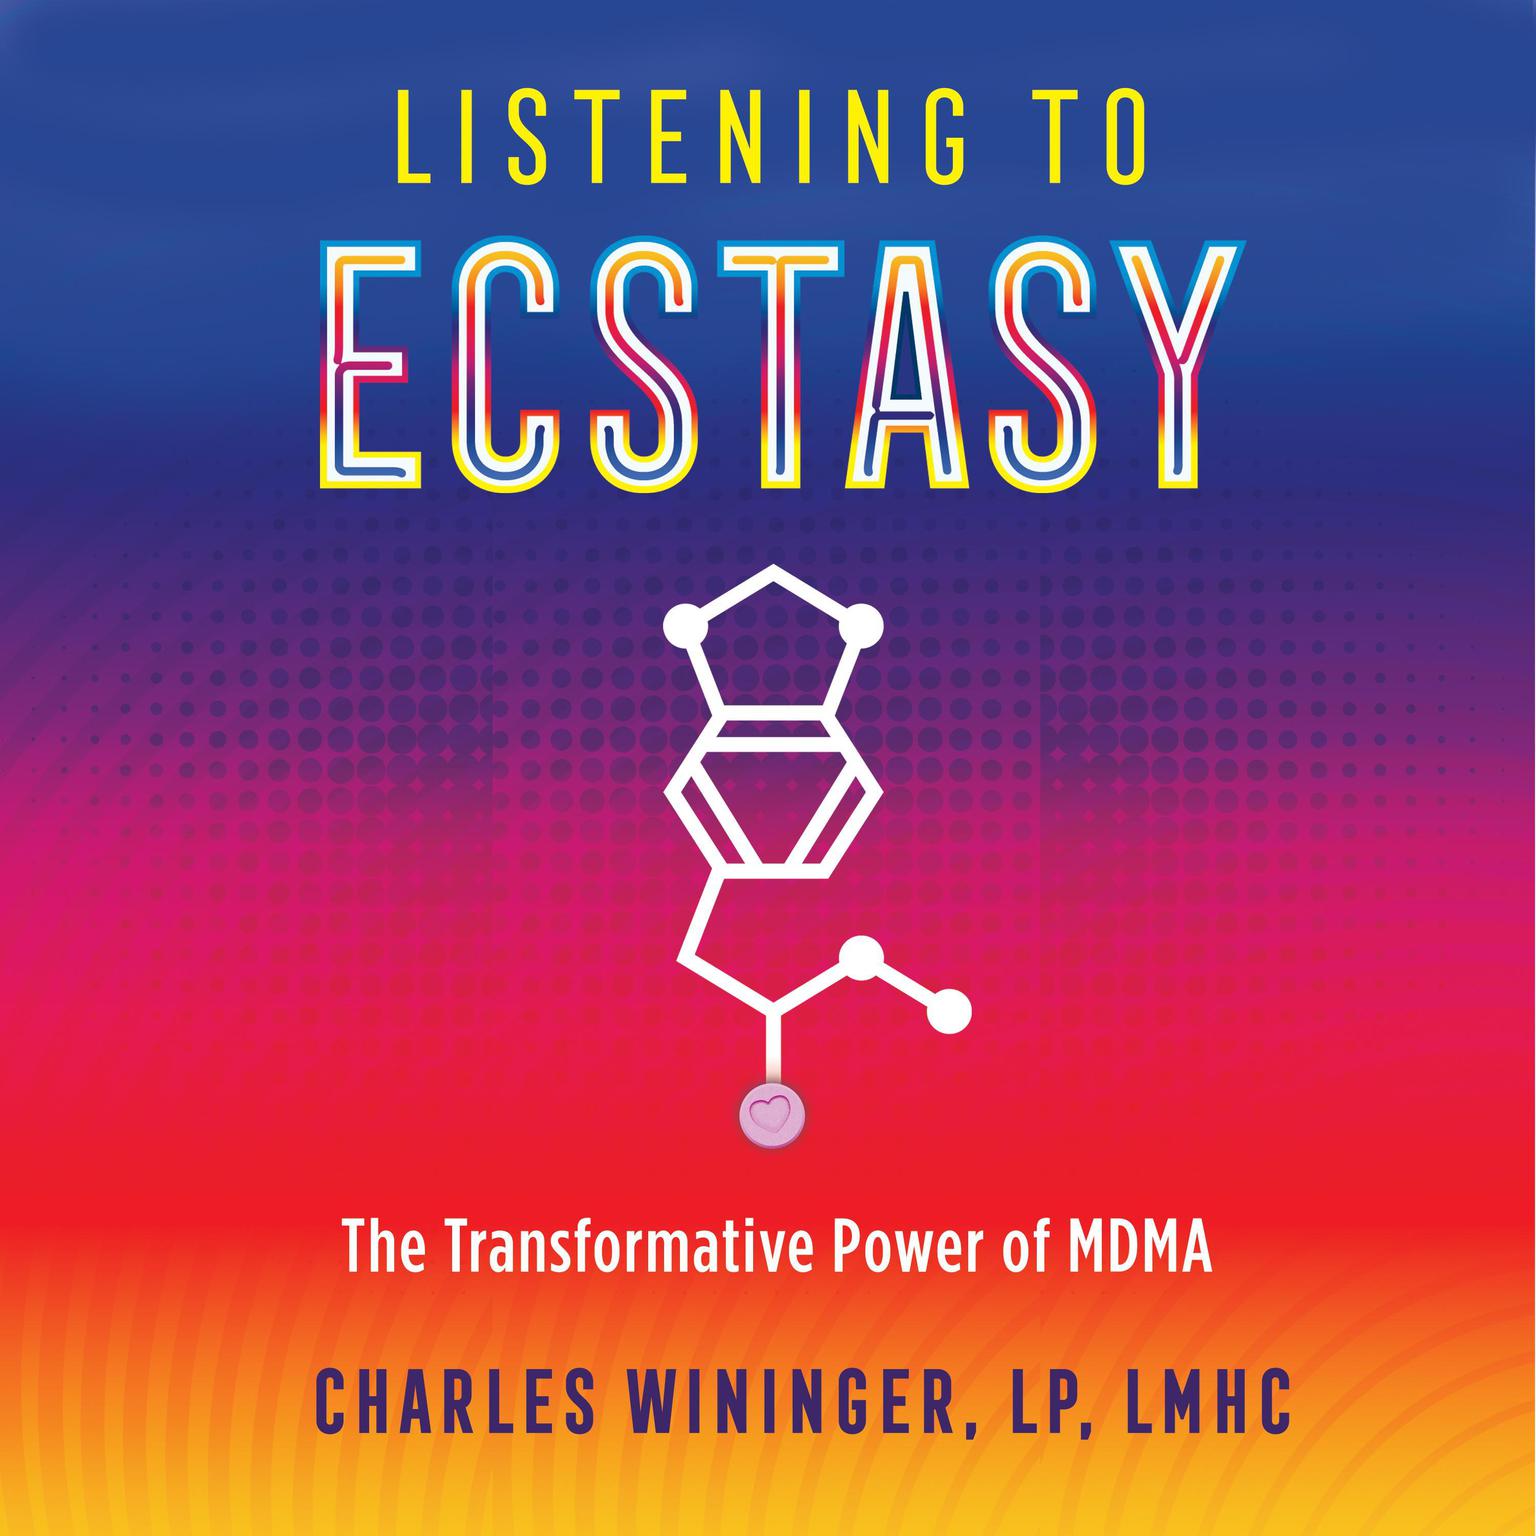 Listening to Ecstasy: The Transformative Power of MDMA Audiobook, by Charles Wininger